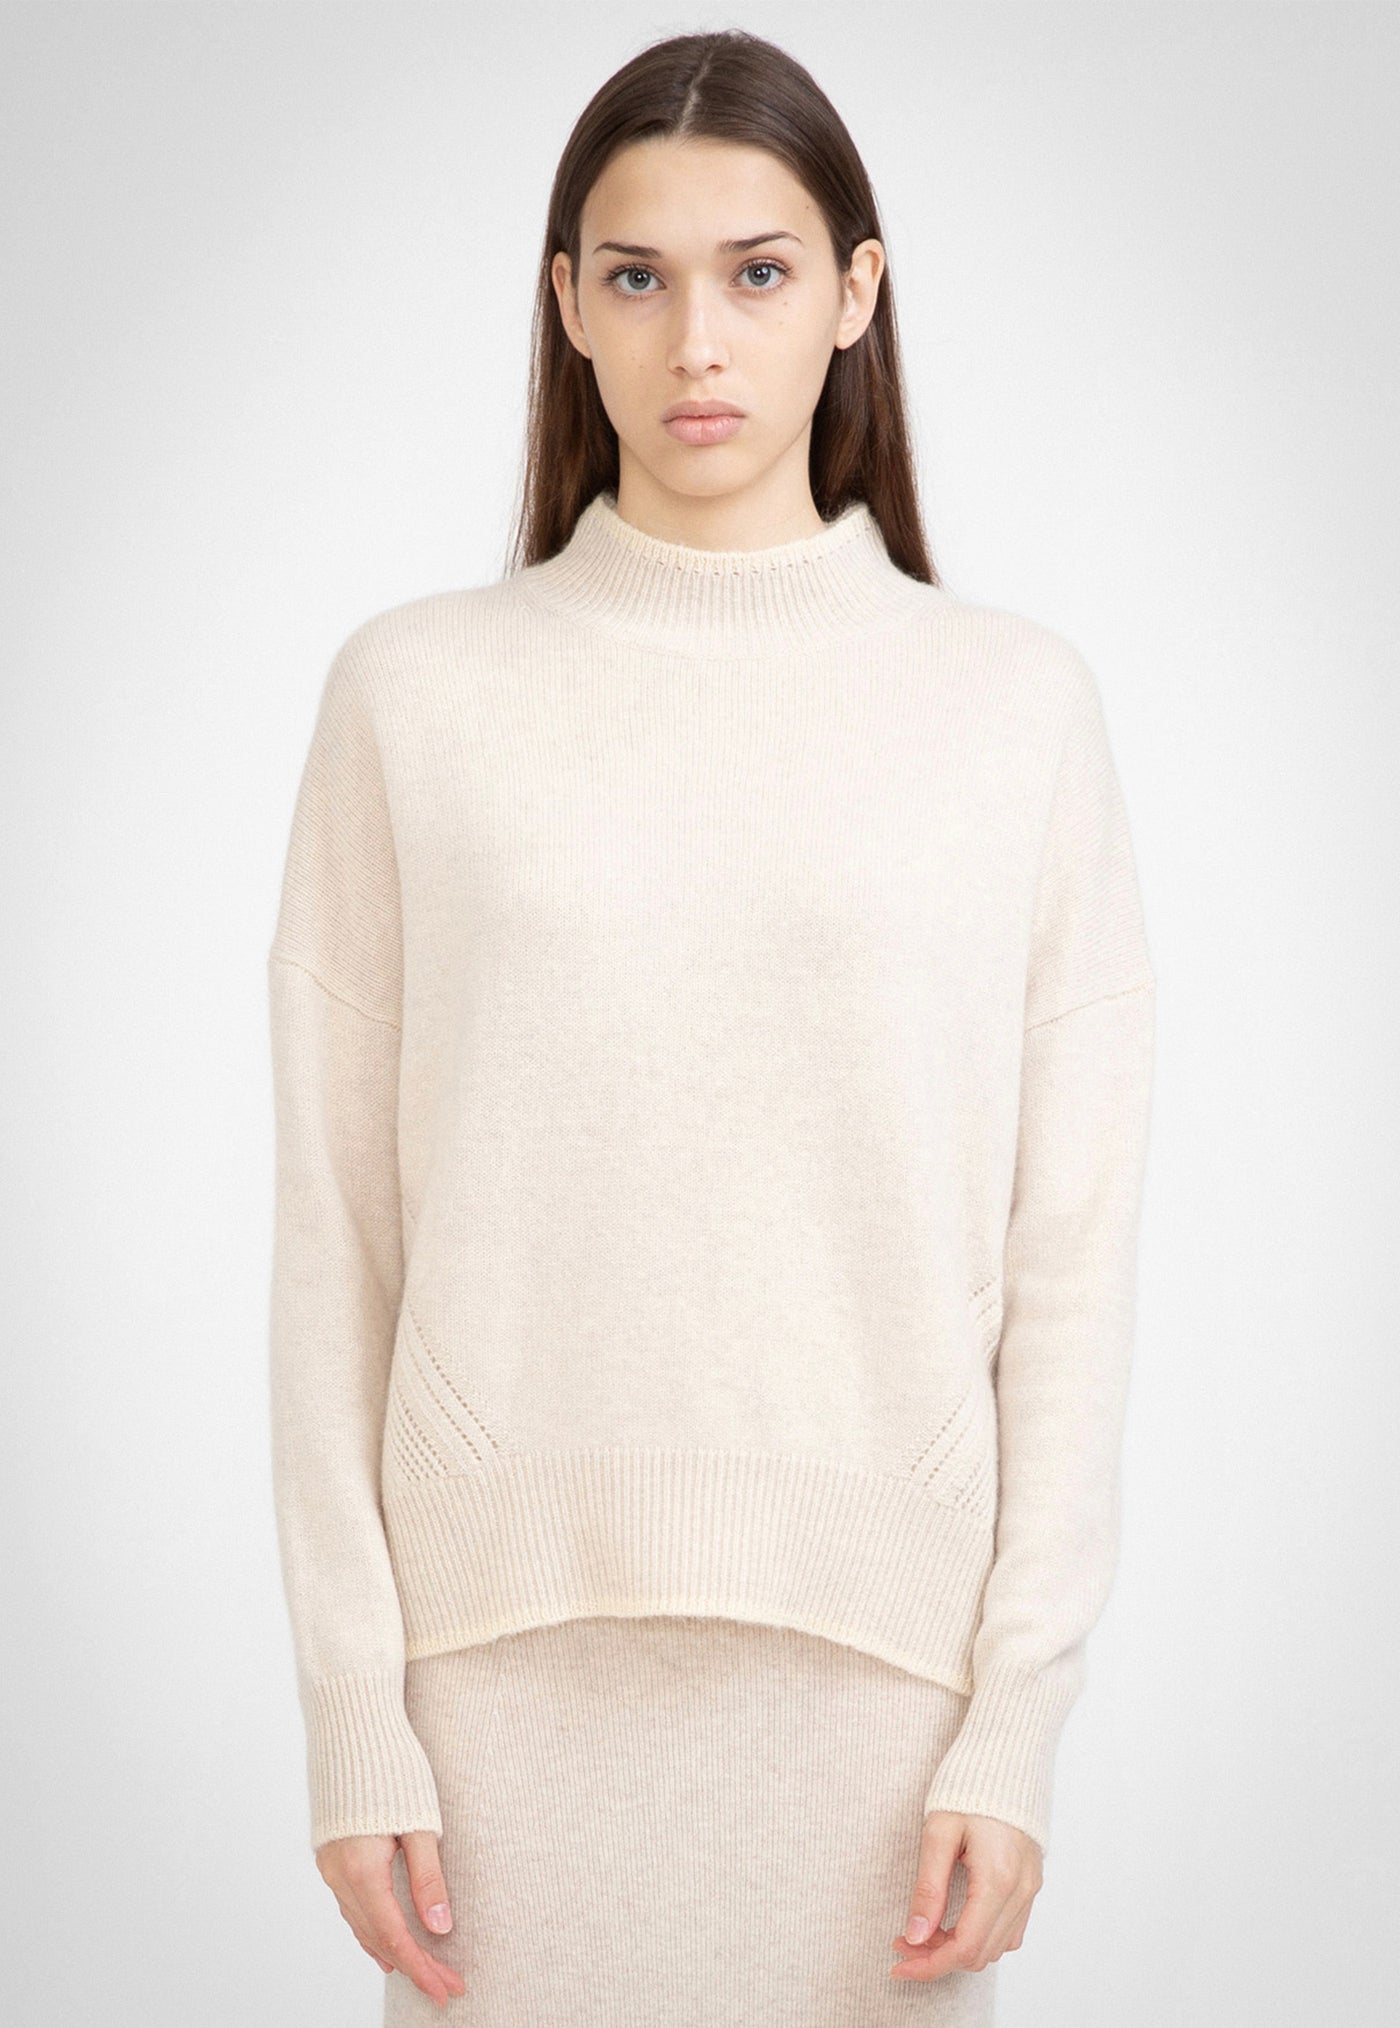 N.08 Cashmere Contrast Funnel Neck Sweater - Shell sold by Angel Divine